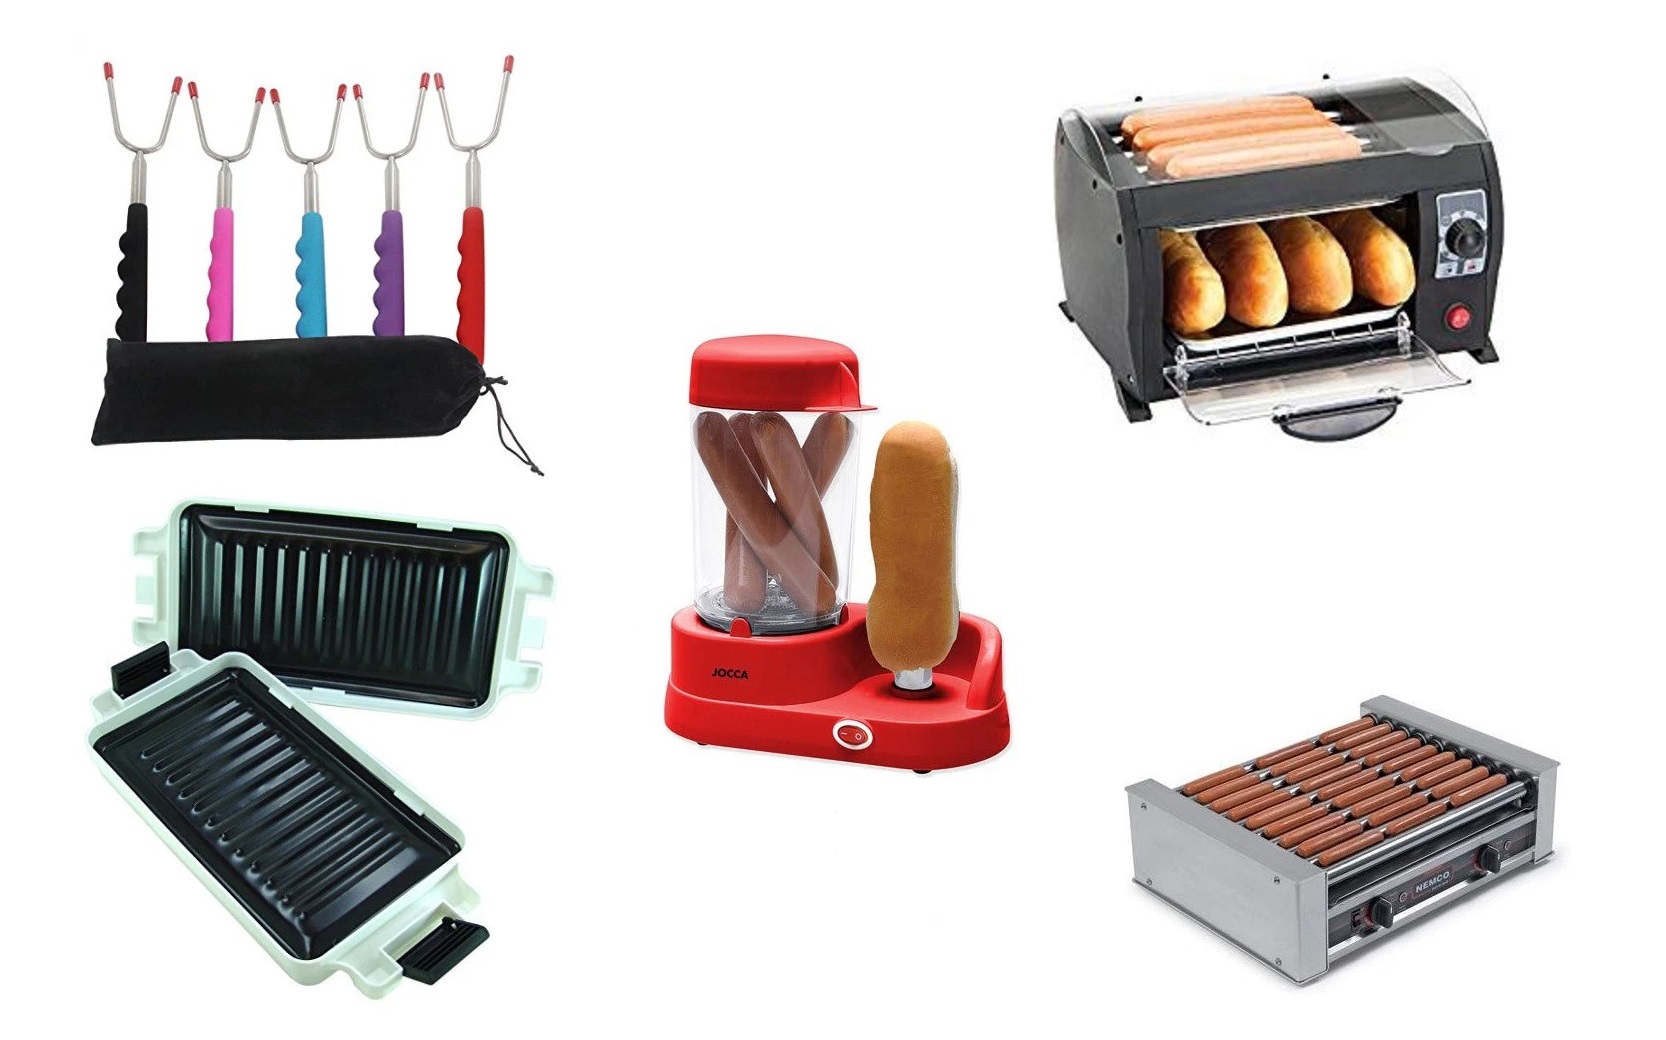 Ten Amazing Kitchen Gadgets for People Who Love Hotdogs